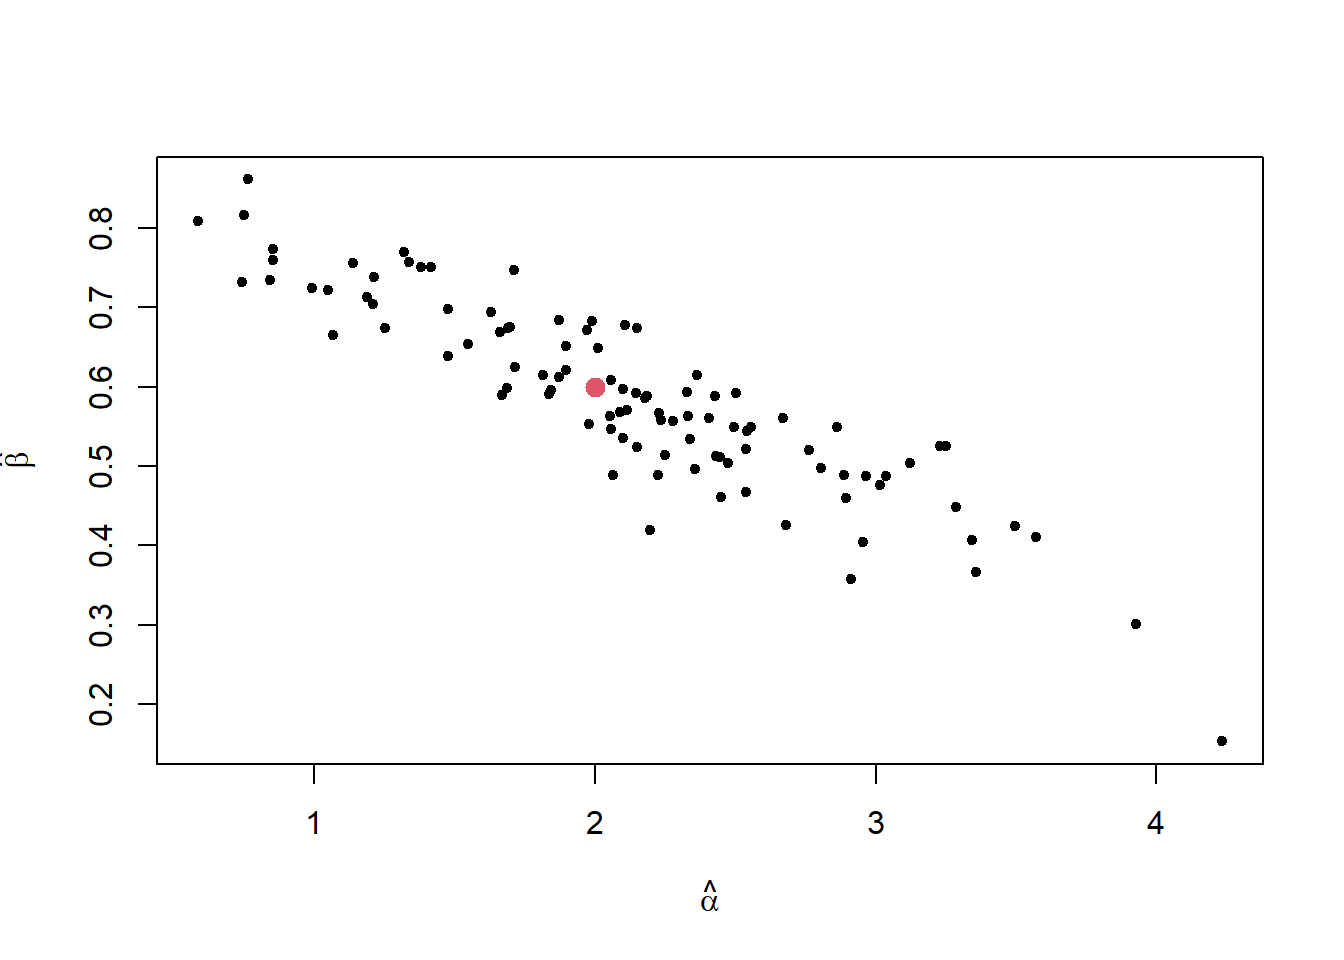 Plot of estimates of straight line model parameters with true parameter values denoted by red dot